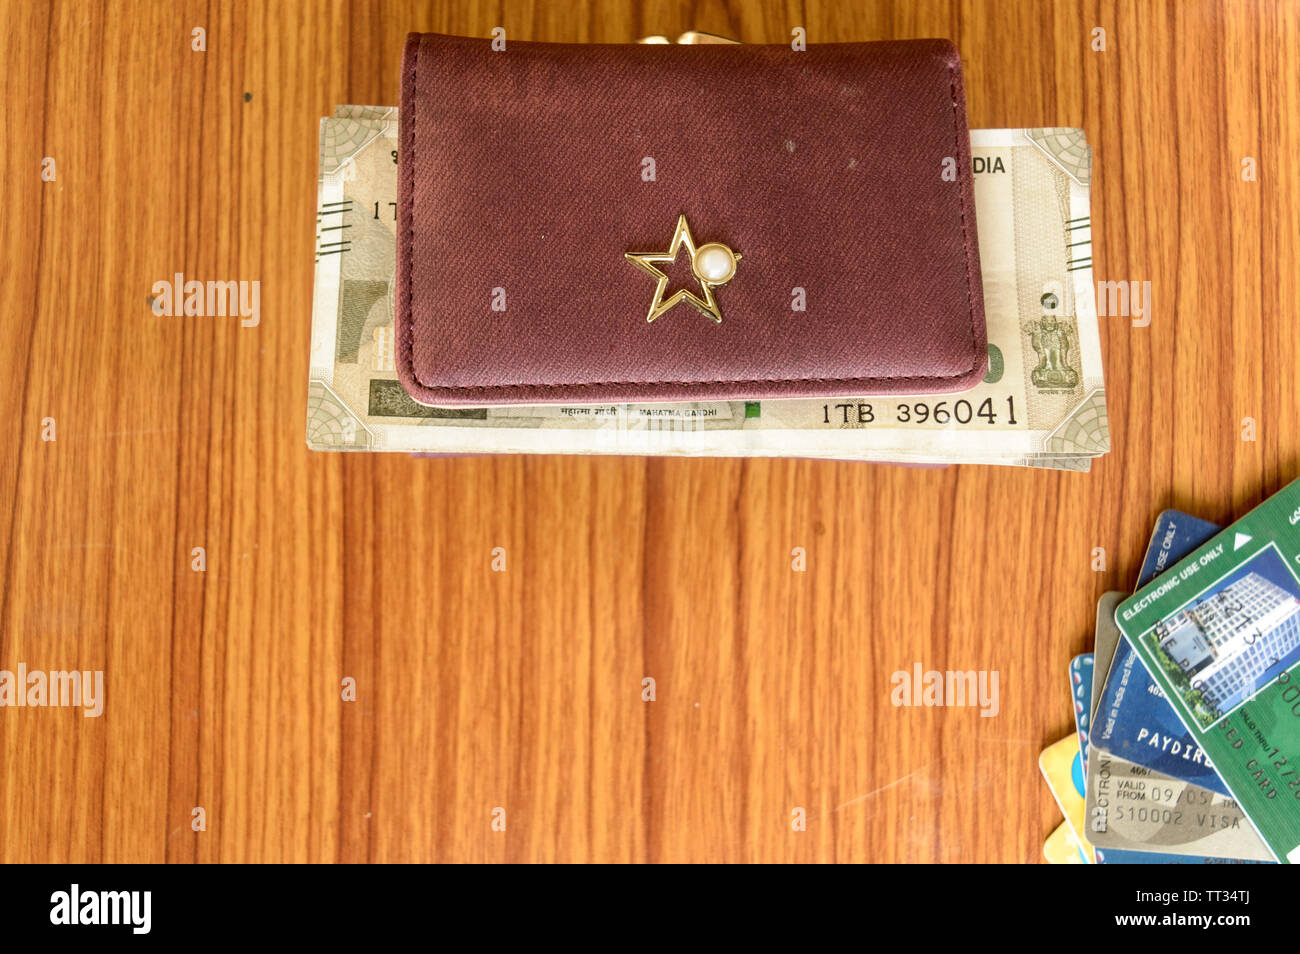 Five hundred (500) cash note in brown ladies purse and stack of credit cards on a wooden table. Business finance economy concept. High angel view with Stock Photo